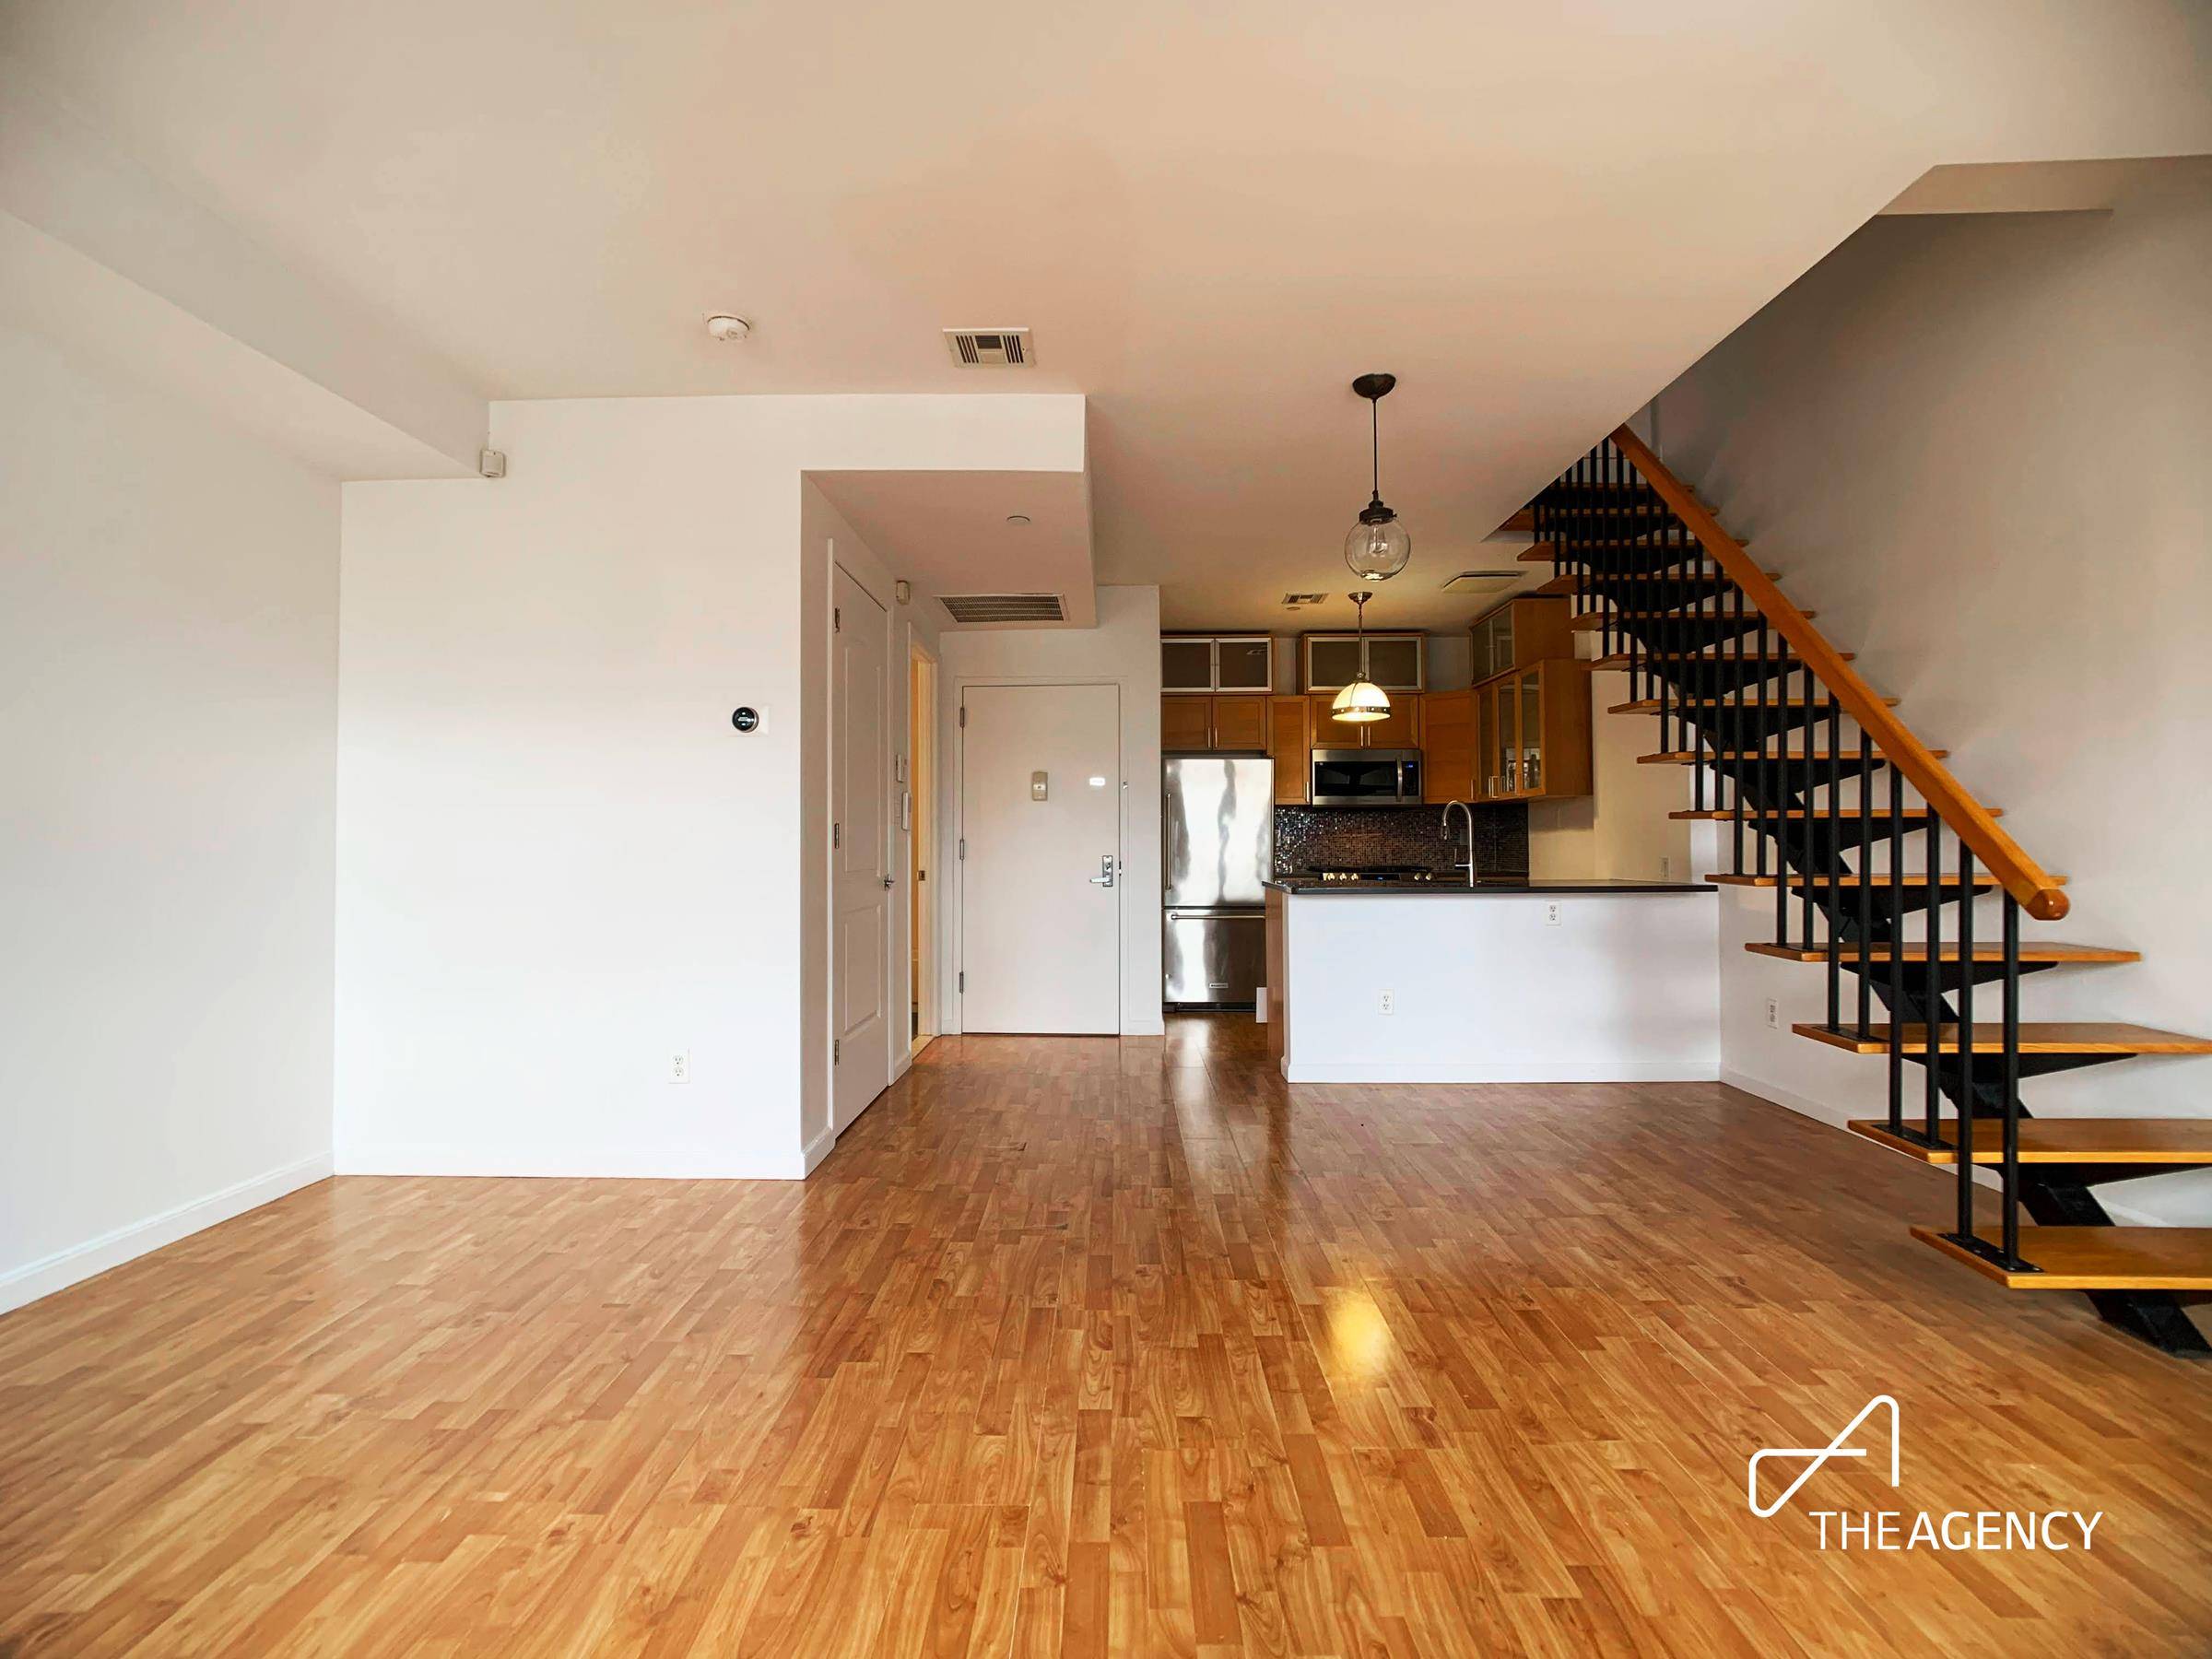 This unit 4B, the penthouse, is a 1 bedroom 1BR 2 bathroom 2BA duplex unit designed perfectly with an open concept downstairs, an extra half bedroom office upstairs, access to ...